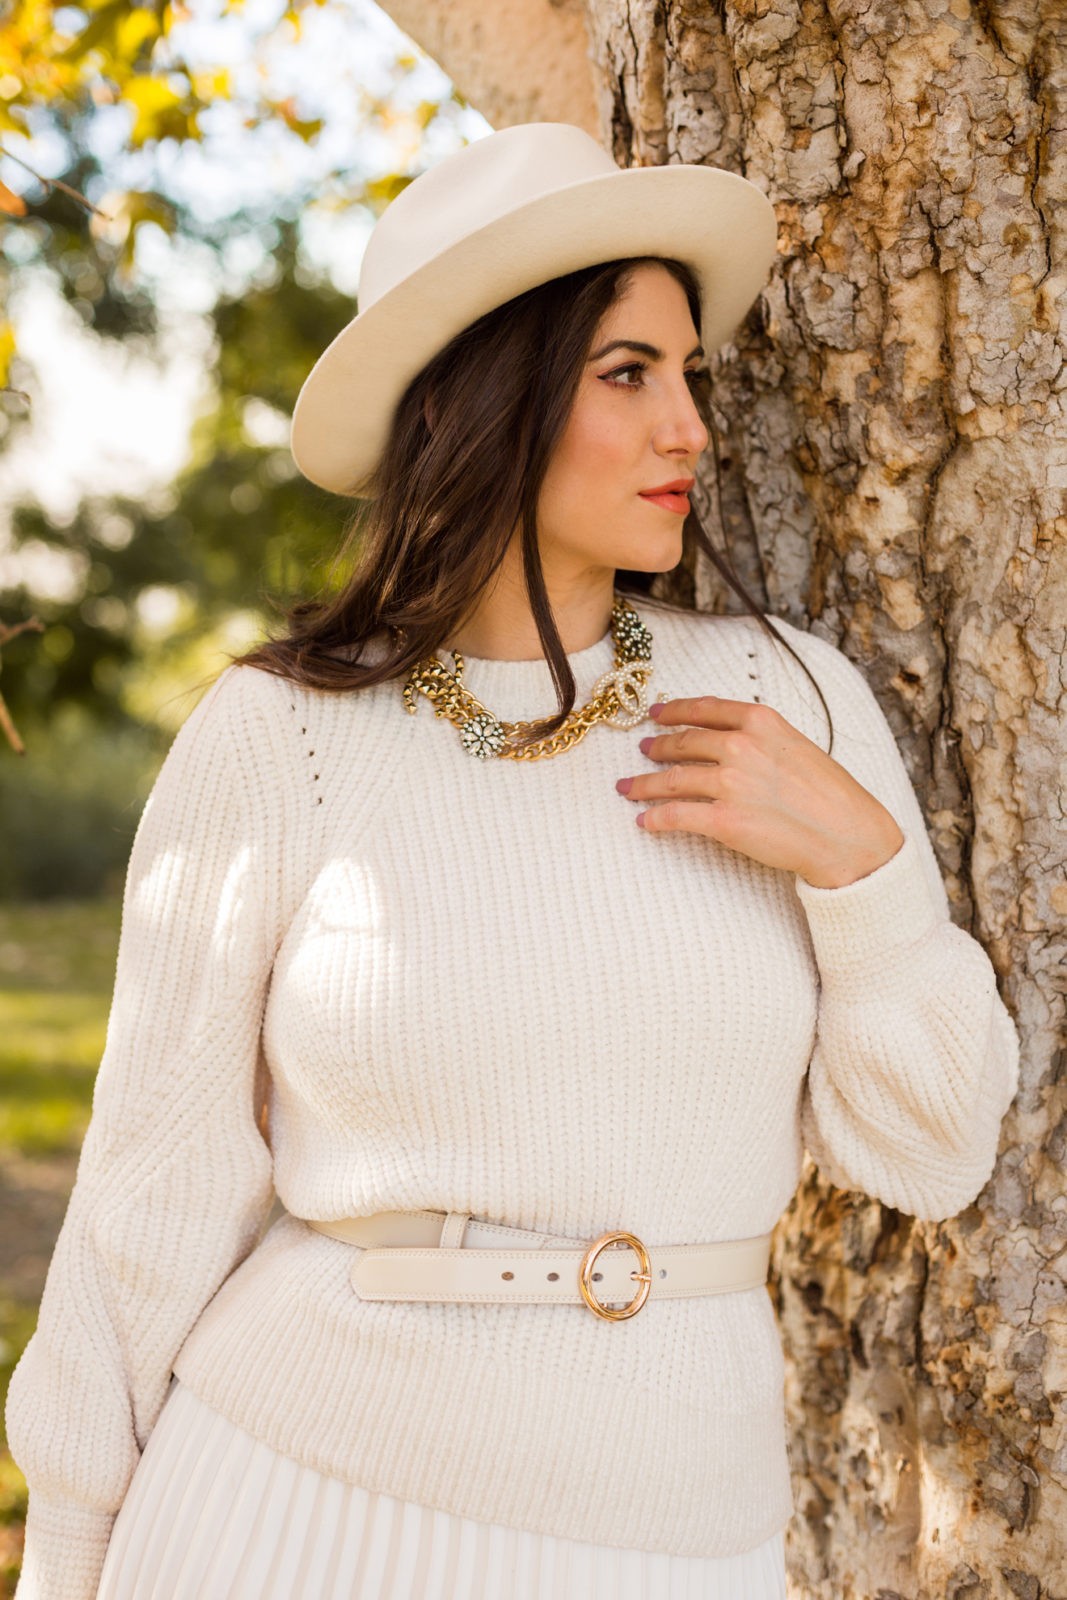 How to Elevate Your Style in Your 30's by Los Angeles Blogger Laura Lily, All white outfit | How to Elevate Your Style in Your 30's by Los Angeles Blogger Laura Lily, All white outfit | How to Elevate Your Style in Your 30's by popular Los Angeles fashion blogger, Laura Lily: image of a woman wearing a Target Women's Relaxed Fit High-Rise Pleated Skirt, Amazon CARDANRO Women's Genuine Leather Jeans Dress Belt with Metal Buckle, H&M sweater, white fedora, and Sam Edelman boots.